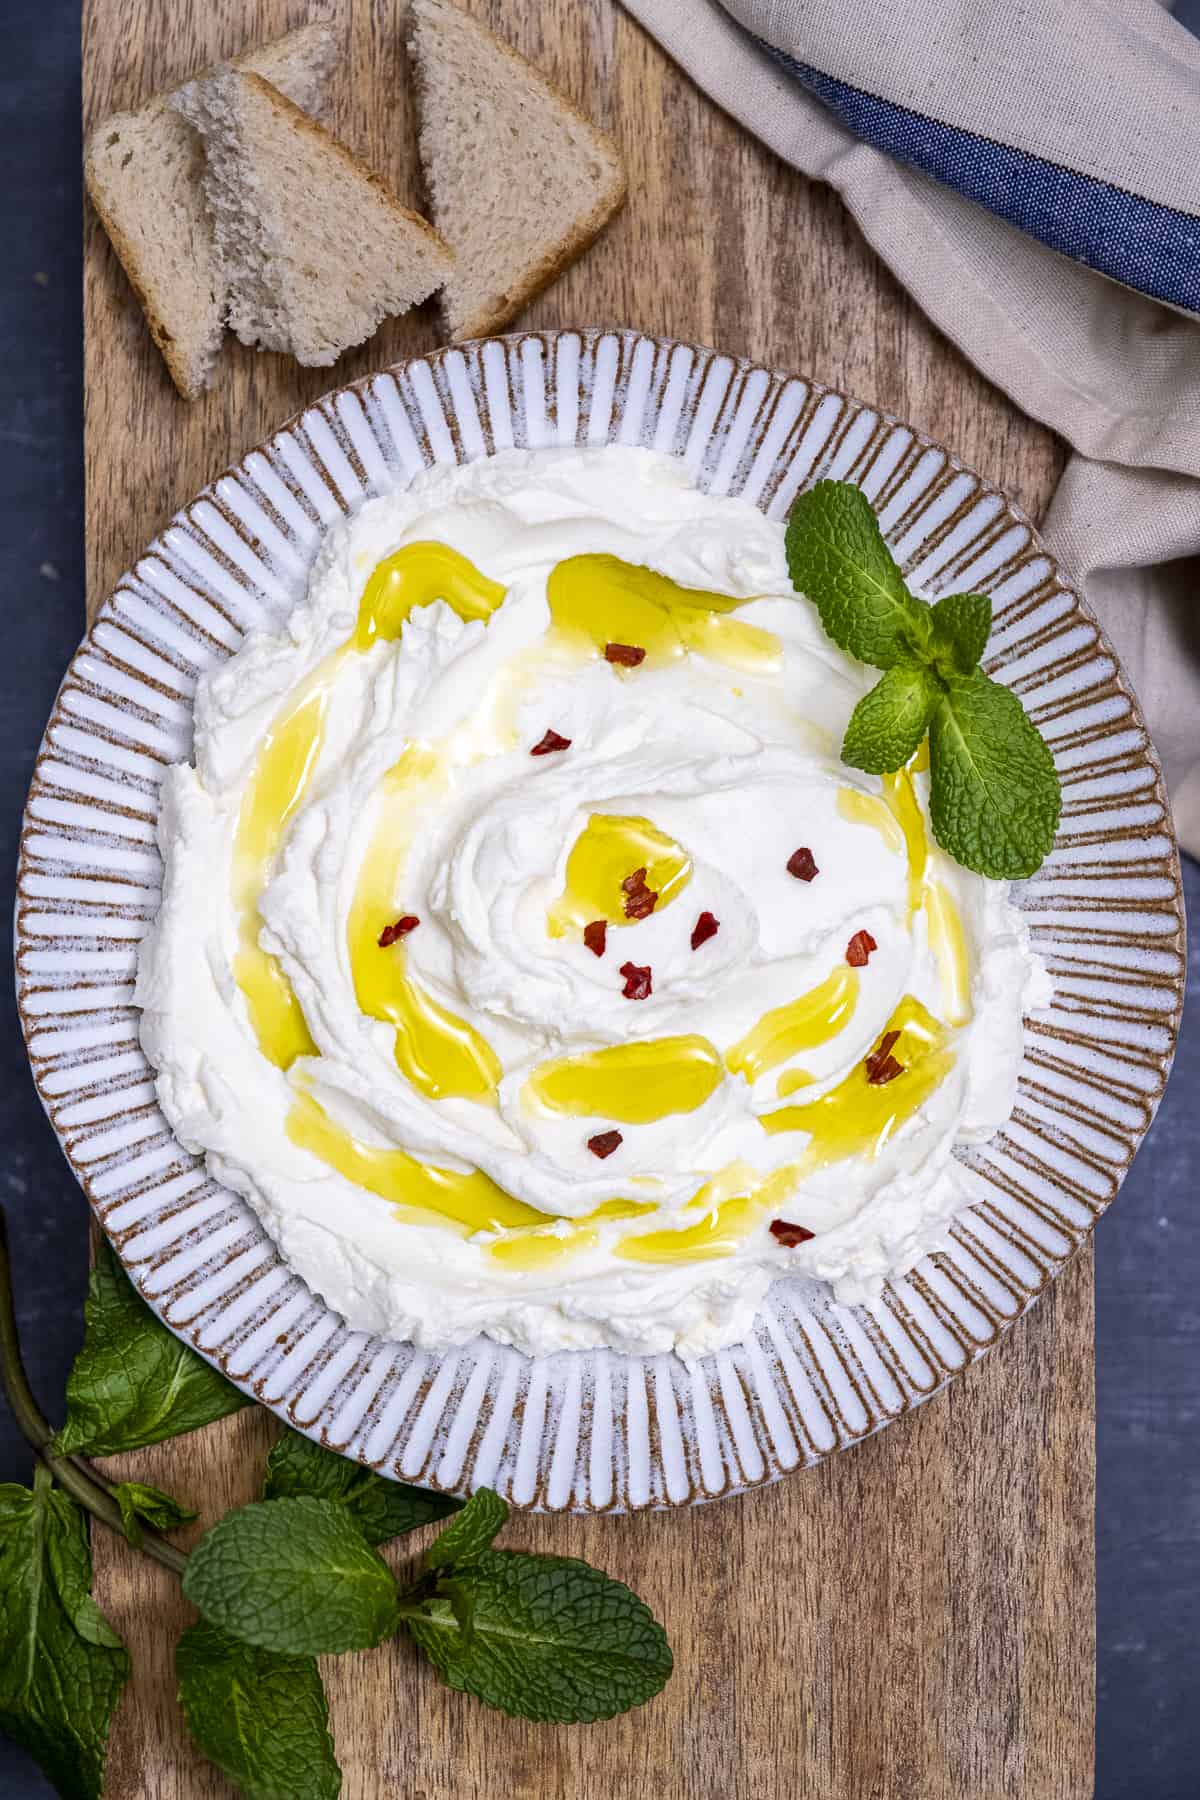 Strained thick yogurt drizzled with olive oil and garnished with fresh mint leaves and red pepper flakes on a white ceramic plate, small slices of bread on the side.